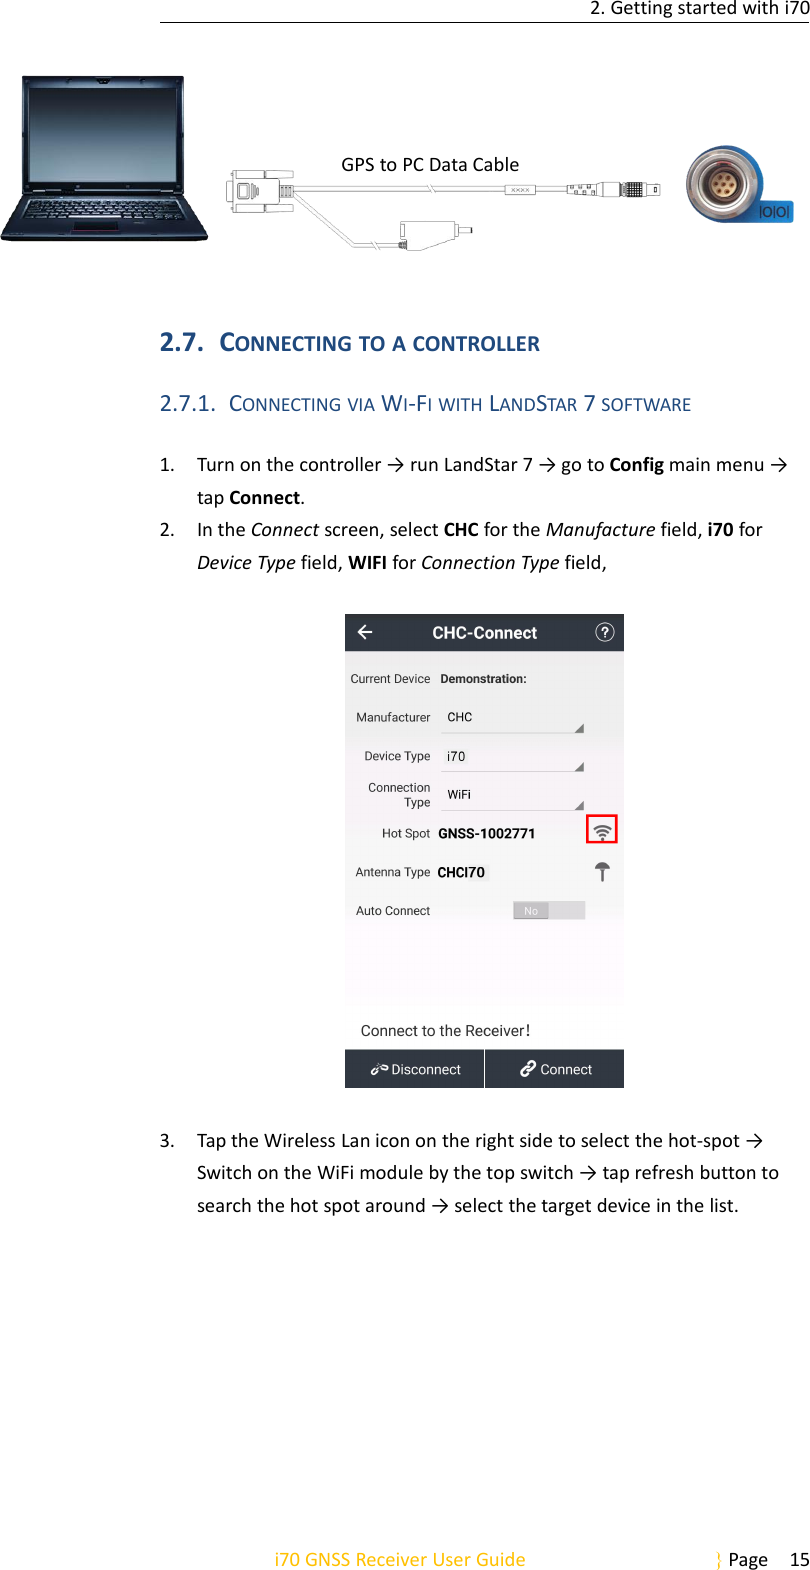 2. Getting started with i70i70 GNSS Receiver User Guide Page 15GPS to PC Data Cable2.7. CONNECTING TO A CONTROLLER2.7.1. CONNECTING VIA WI-FI WITH LANDSTAR 7SOFTWARE1. Turn on the controller → run LandStar 7 → go to Config main menu →tap Connect.2. In the Connect screen, select CHC for the Manufacture field, i70 forDevice Type field, WIFI for Connection Type field,3. Tap the Wireless Lan icon on the right side to select the hot-spot →Switch on the WiFi module by the top switch → tap refresh button tosearch the hot spot around → select the target device in the list.